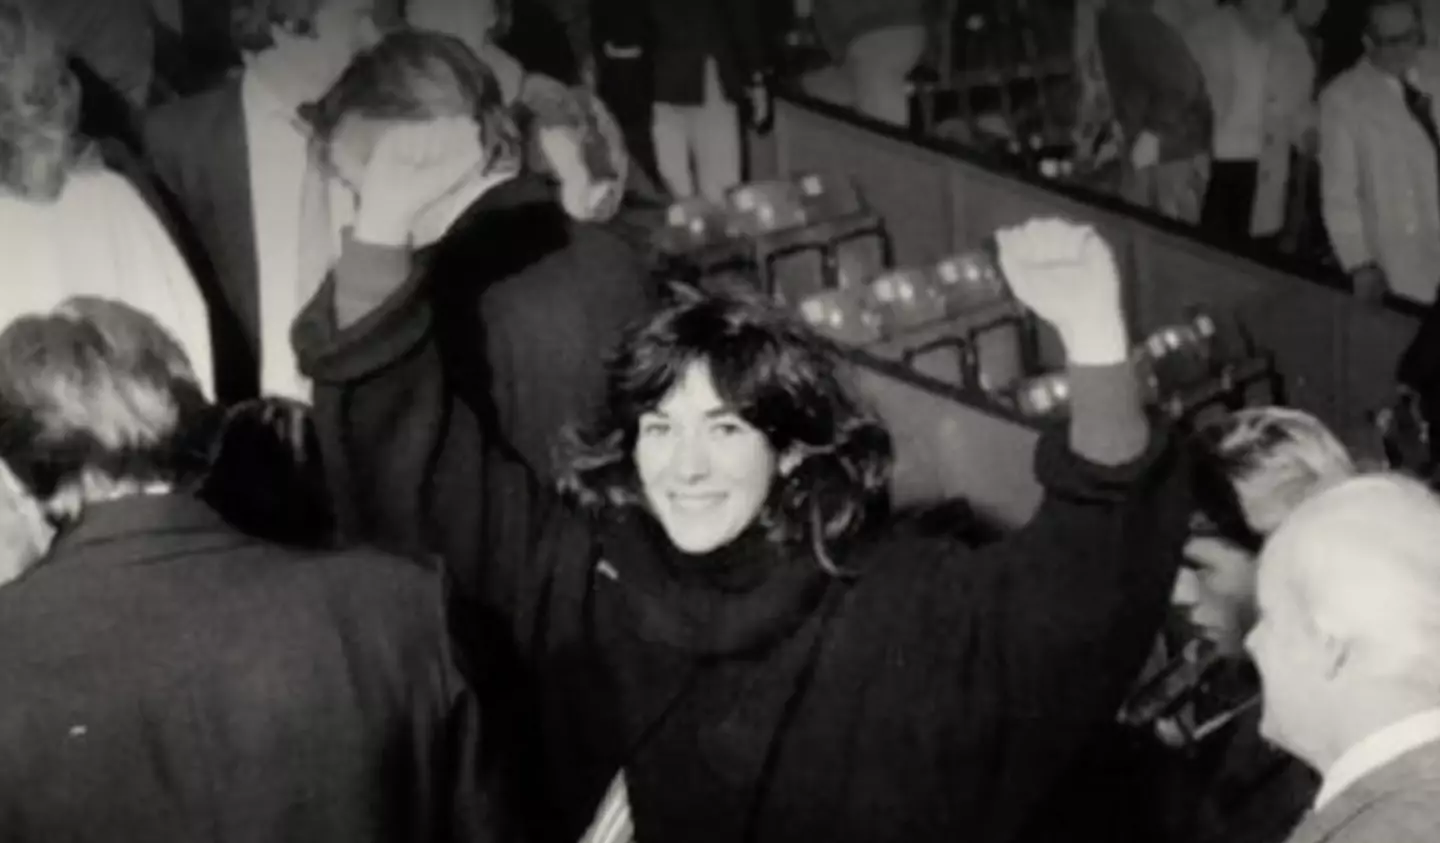 Still of Ghislaine Maxwell from BBC documentary House of Maxwell.